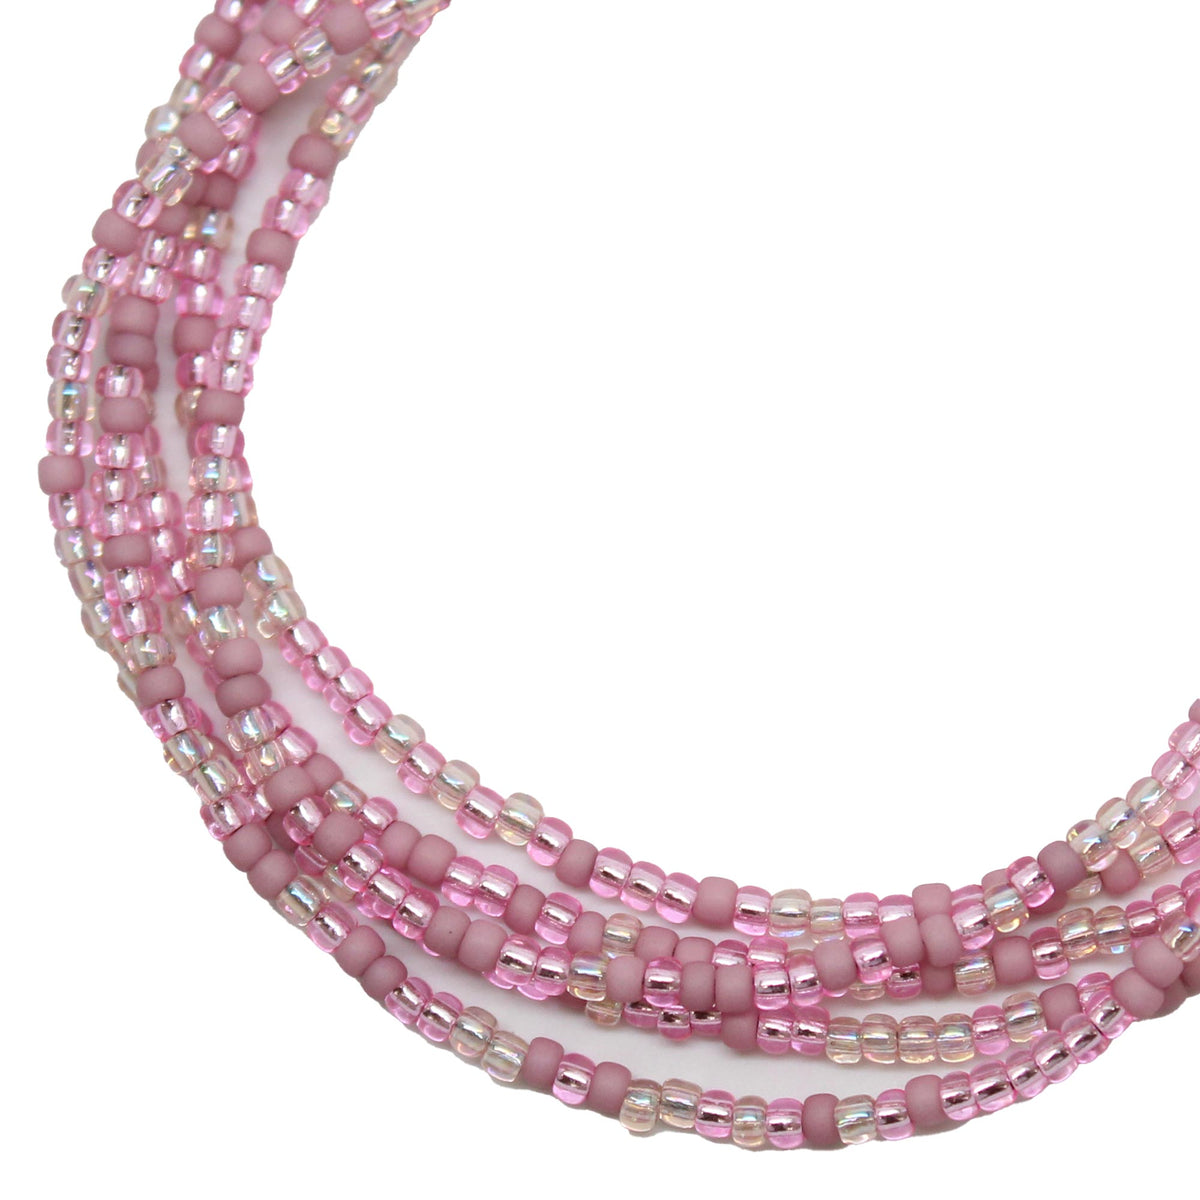 Necklace - Long multi-colored seed bead necklace